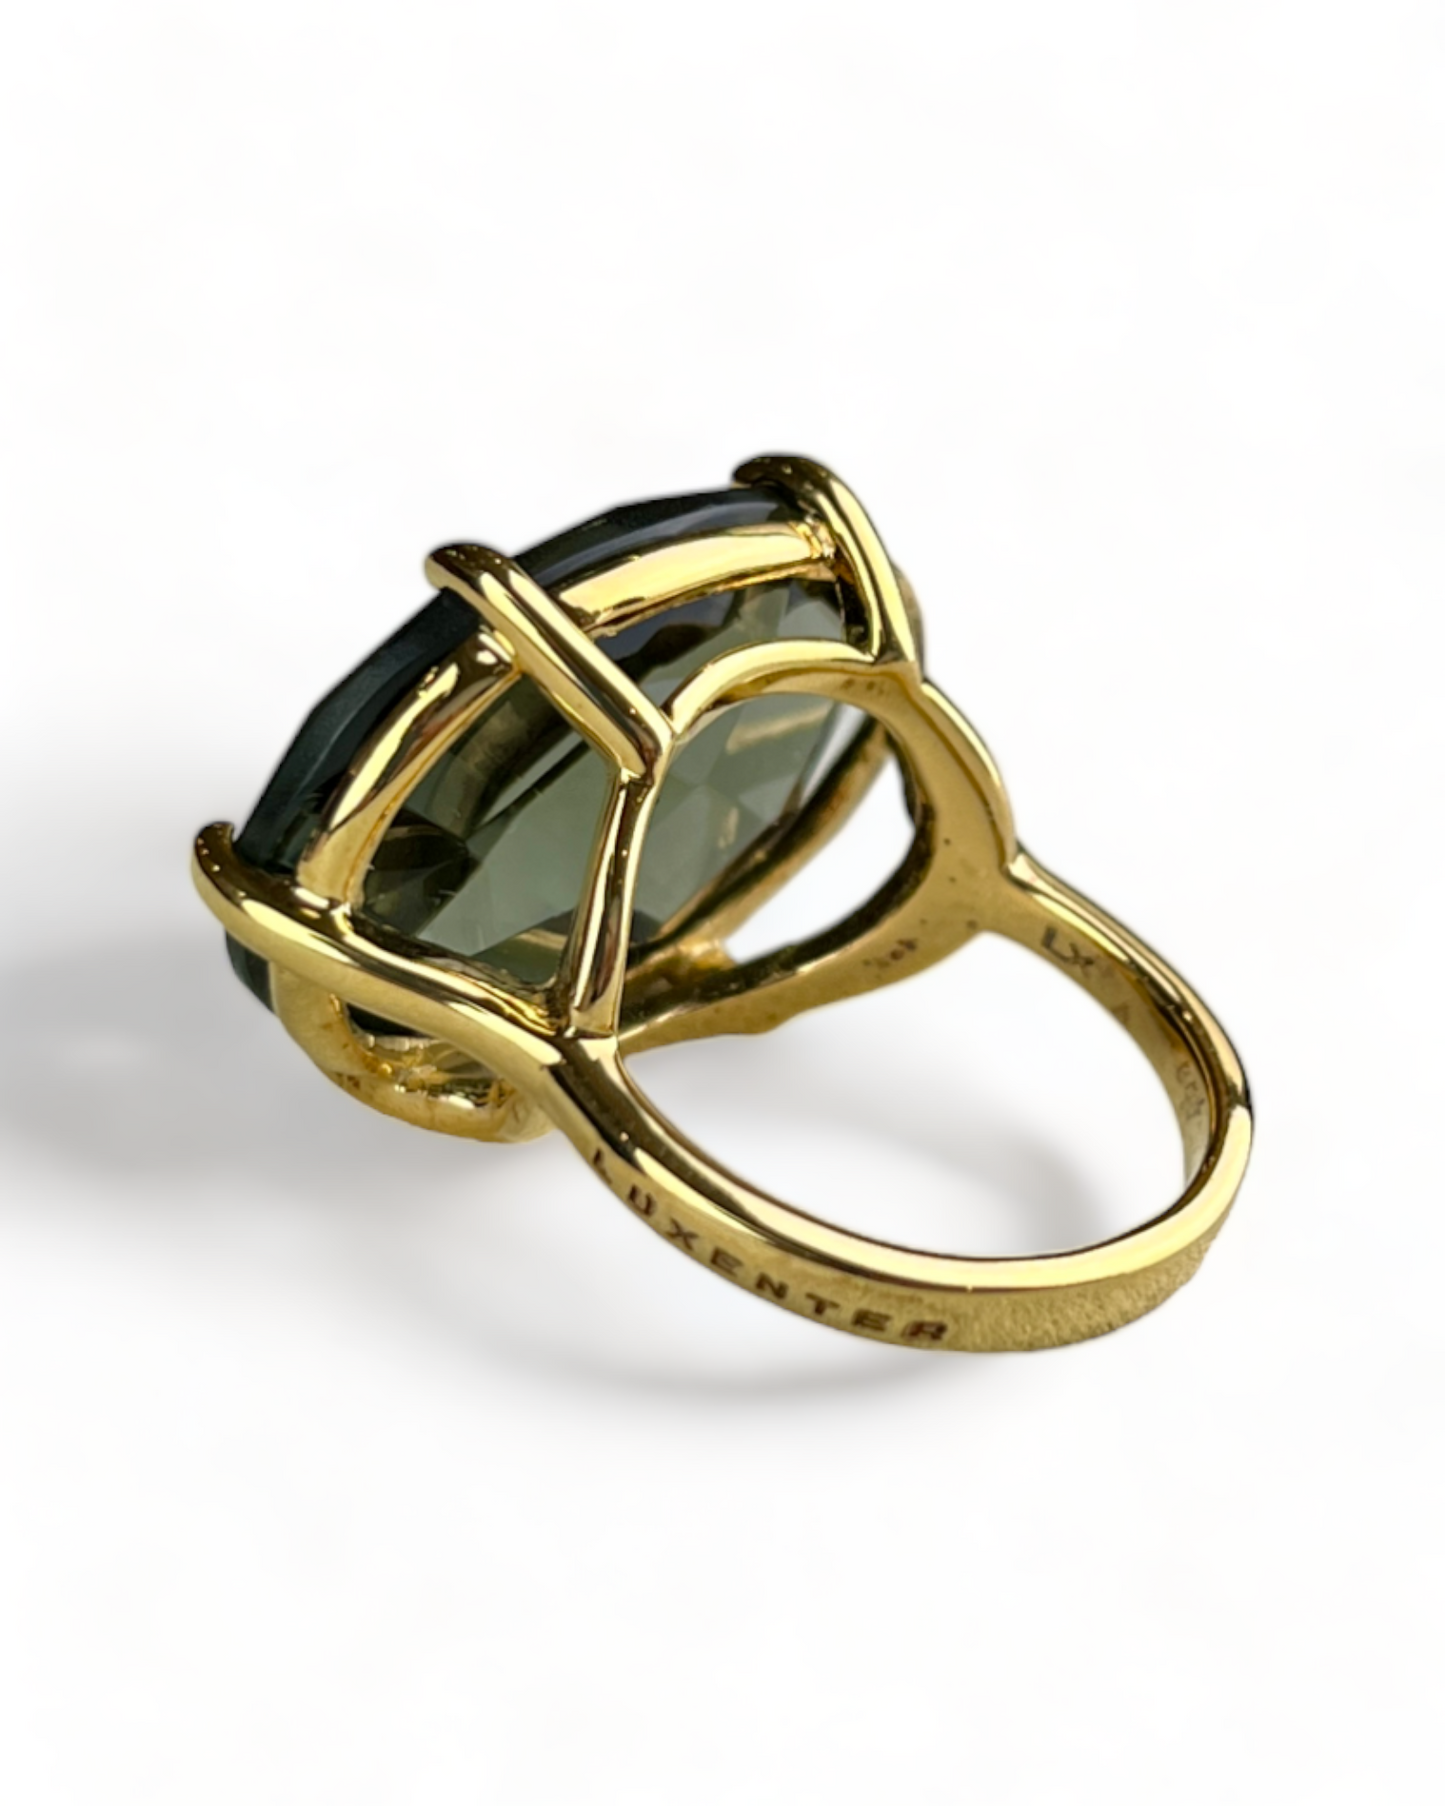 Luxenter Golden Ring with Green Stone